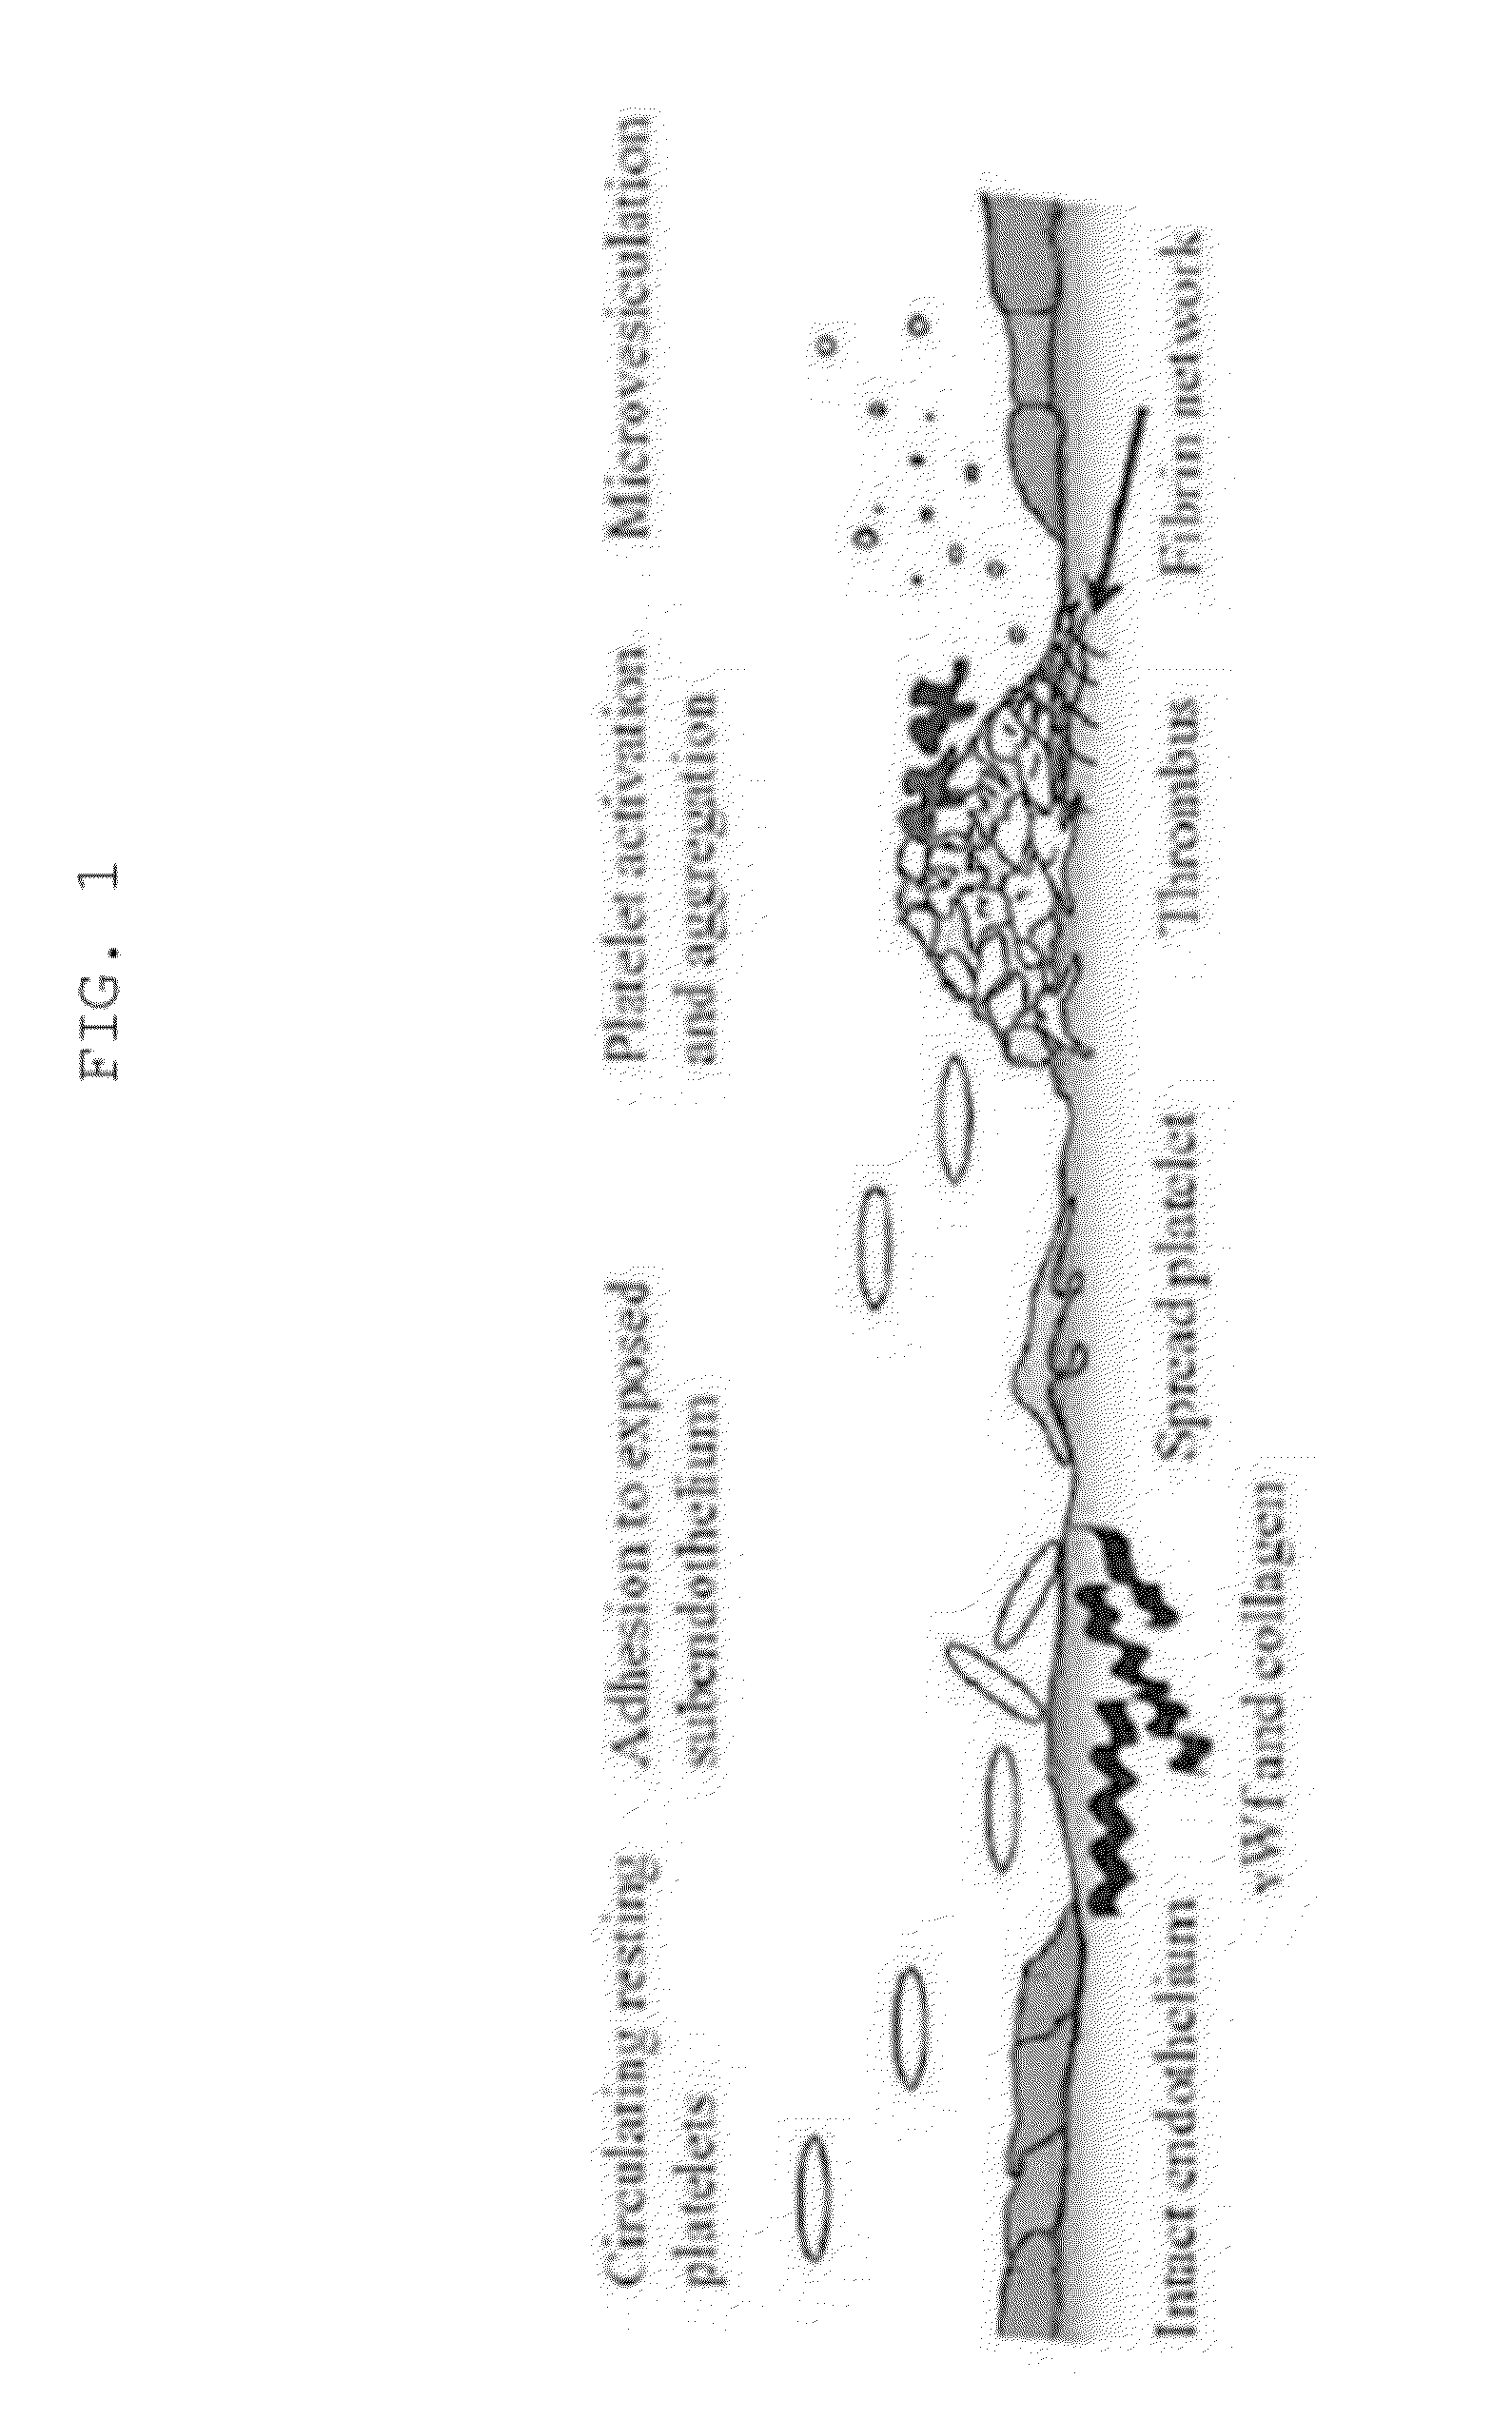 Composition for inducing tissue regeneration by activating platelet-rich plasma (PRP), and method for manufacturing same